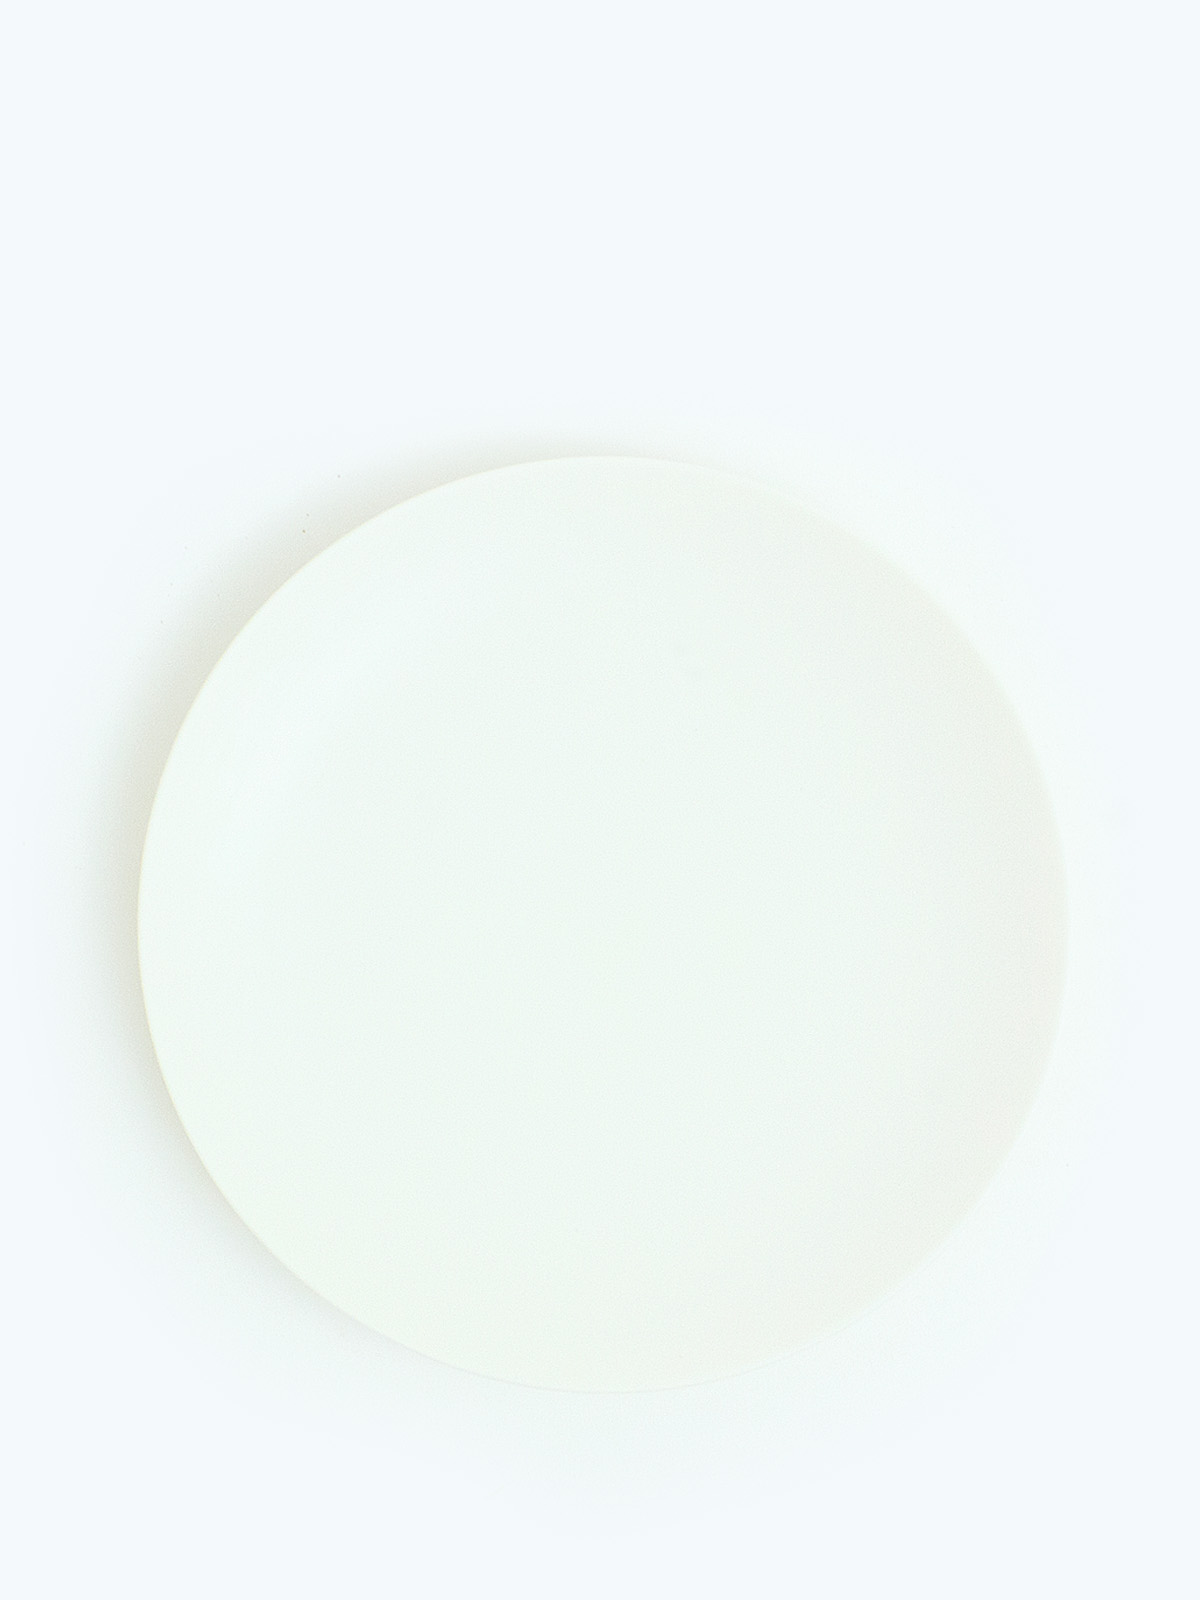 Assiette Blanche 8 - 陶芸家・青木良太公式通販サイト RYOTA AOKI POTTERY